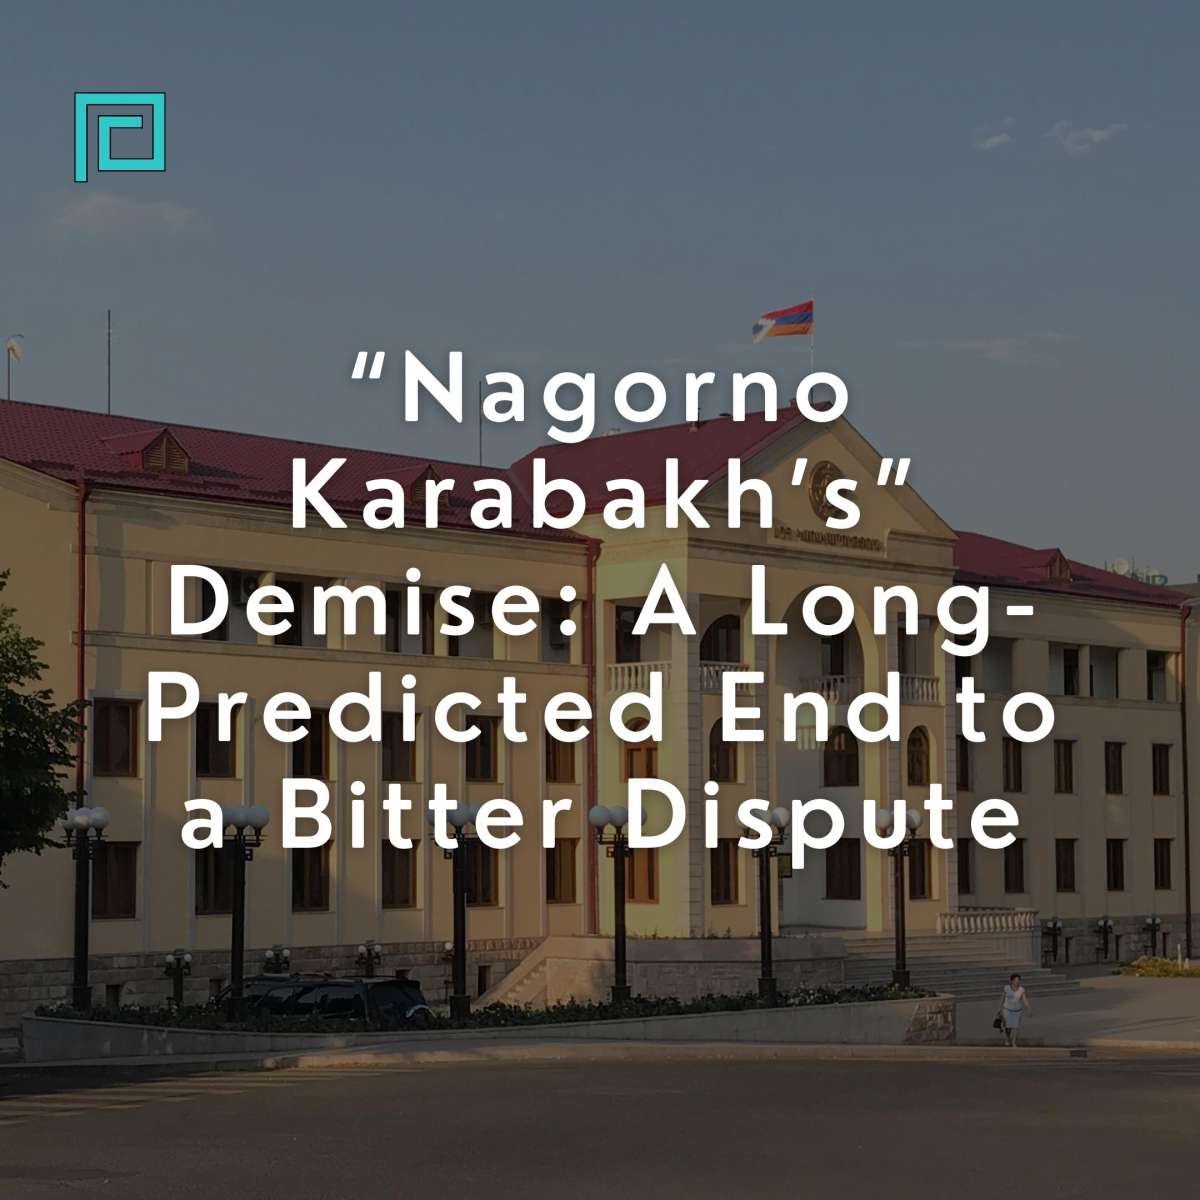 “Nagorno Karabakh’s” Demise: A Long-Predicted End to a Bitter Dispute